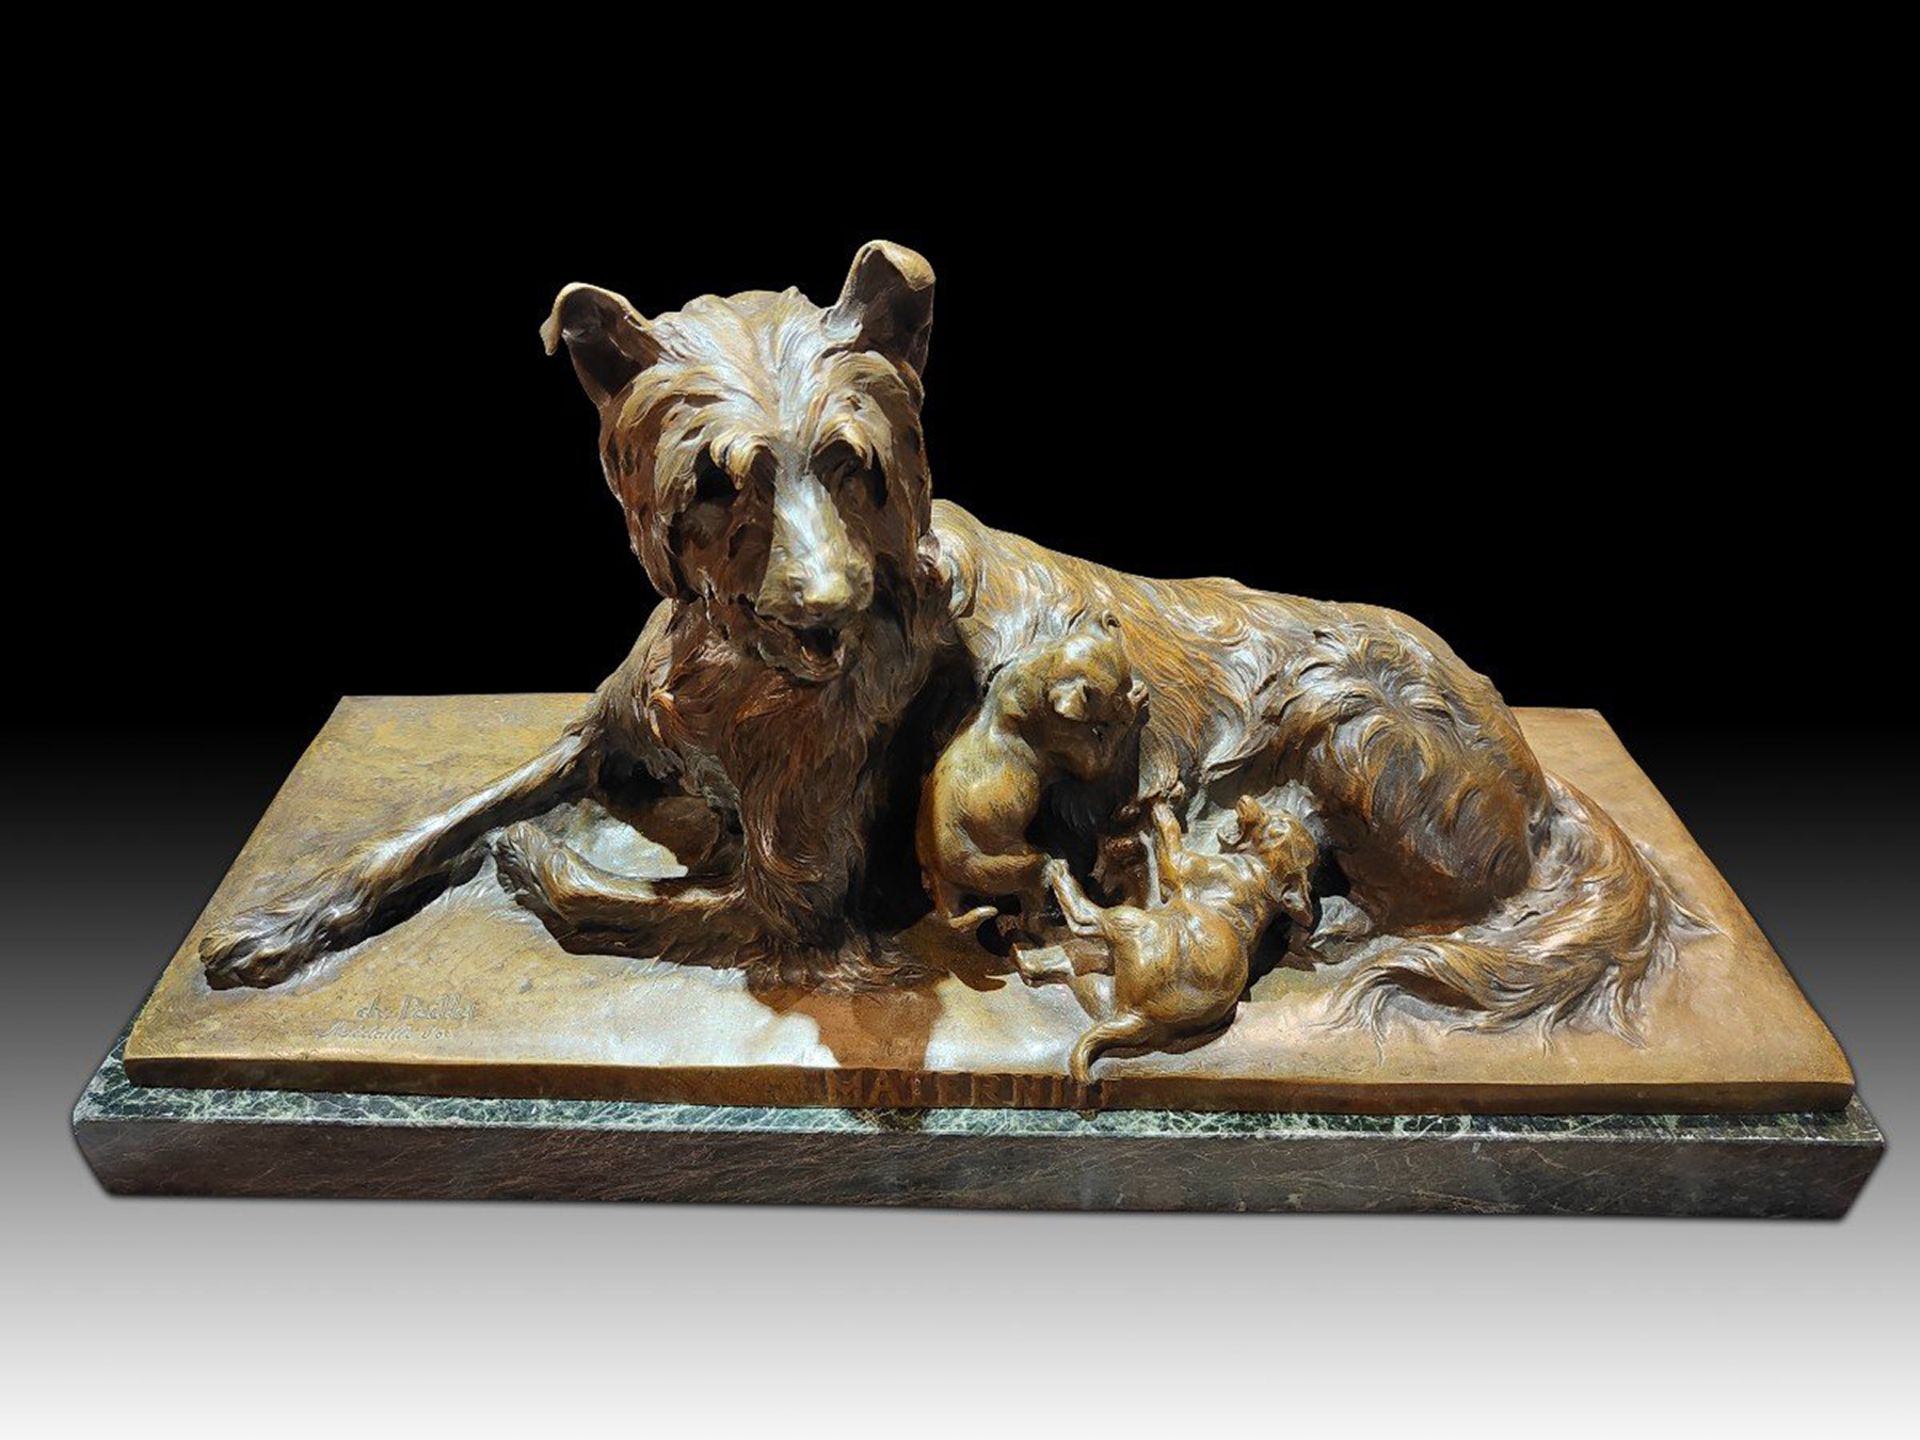 Life-Size Bronze Dog Charles Paillet (French, 1871-1937), 19th Century French School